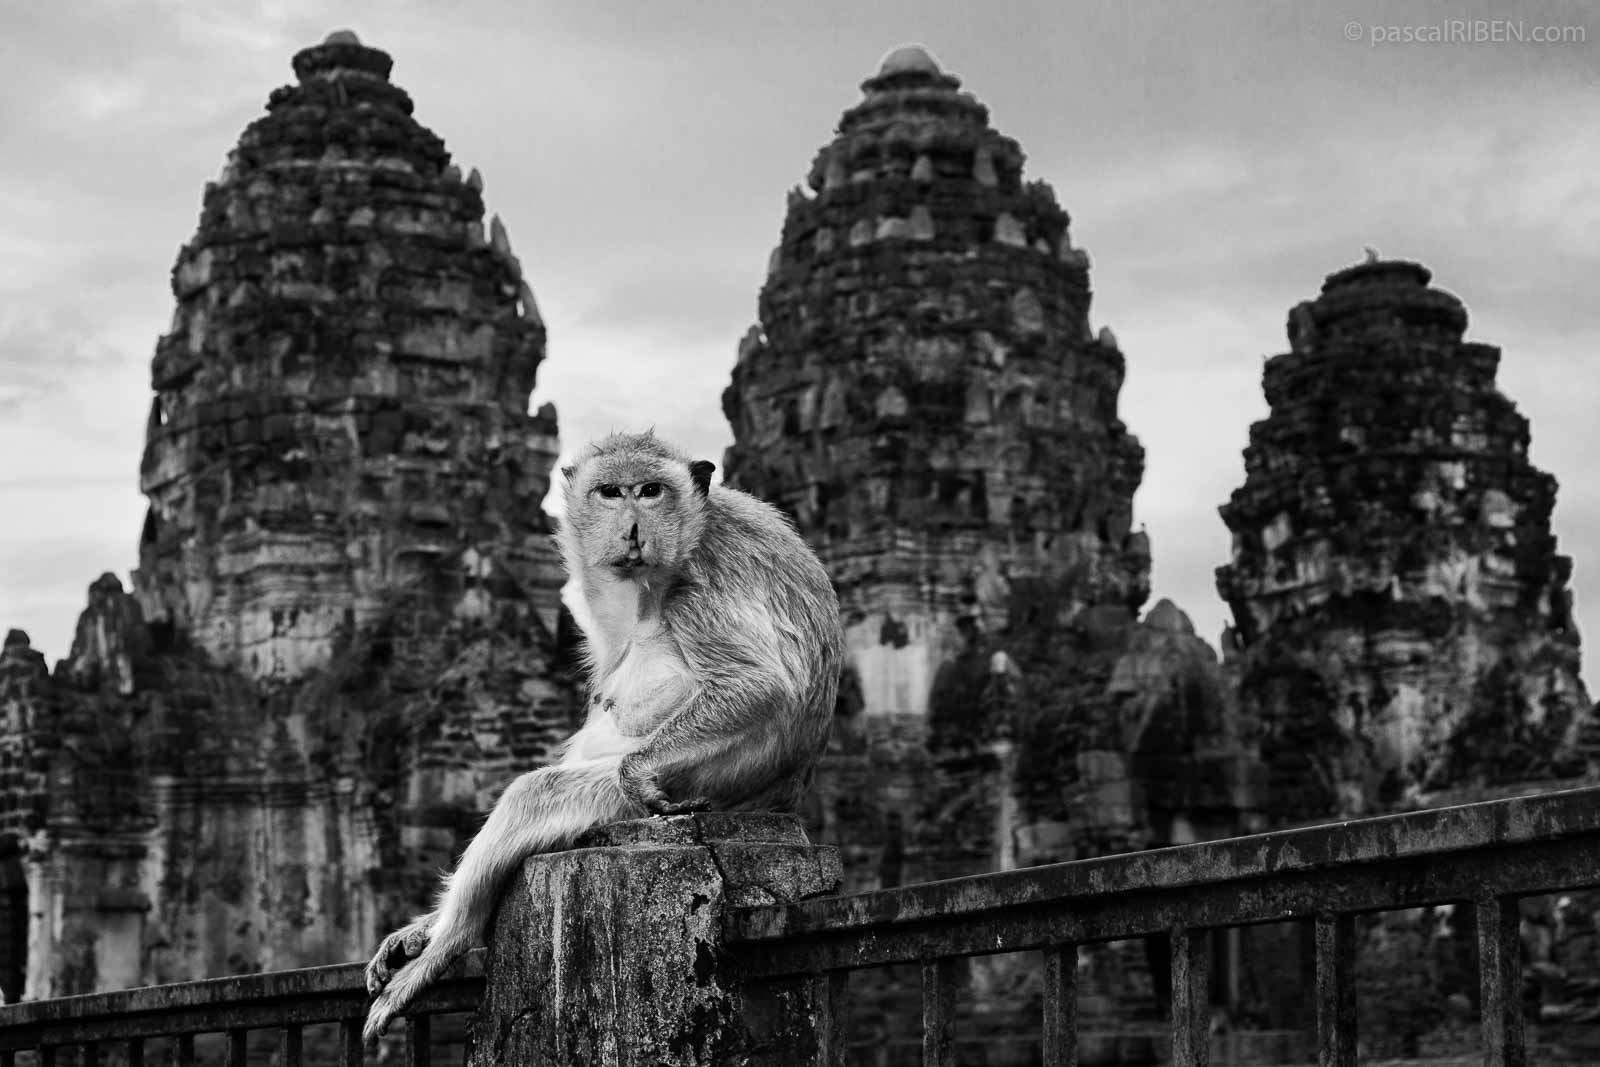 Macaque in front of the Phra Prang Sam Yod temple in Lopburi, Thailand.